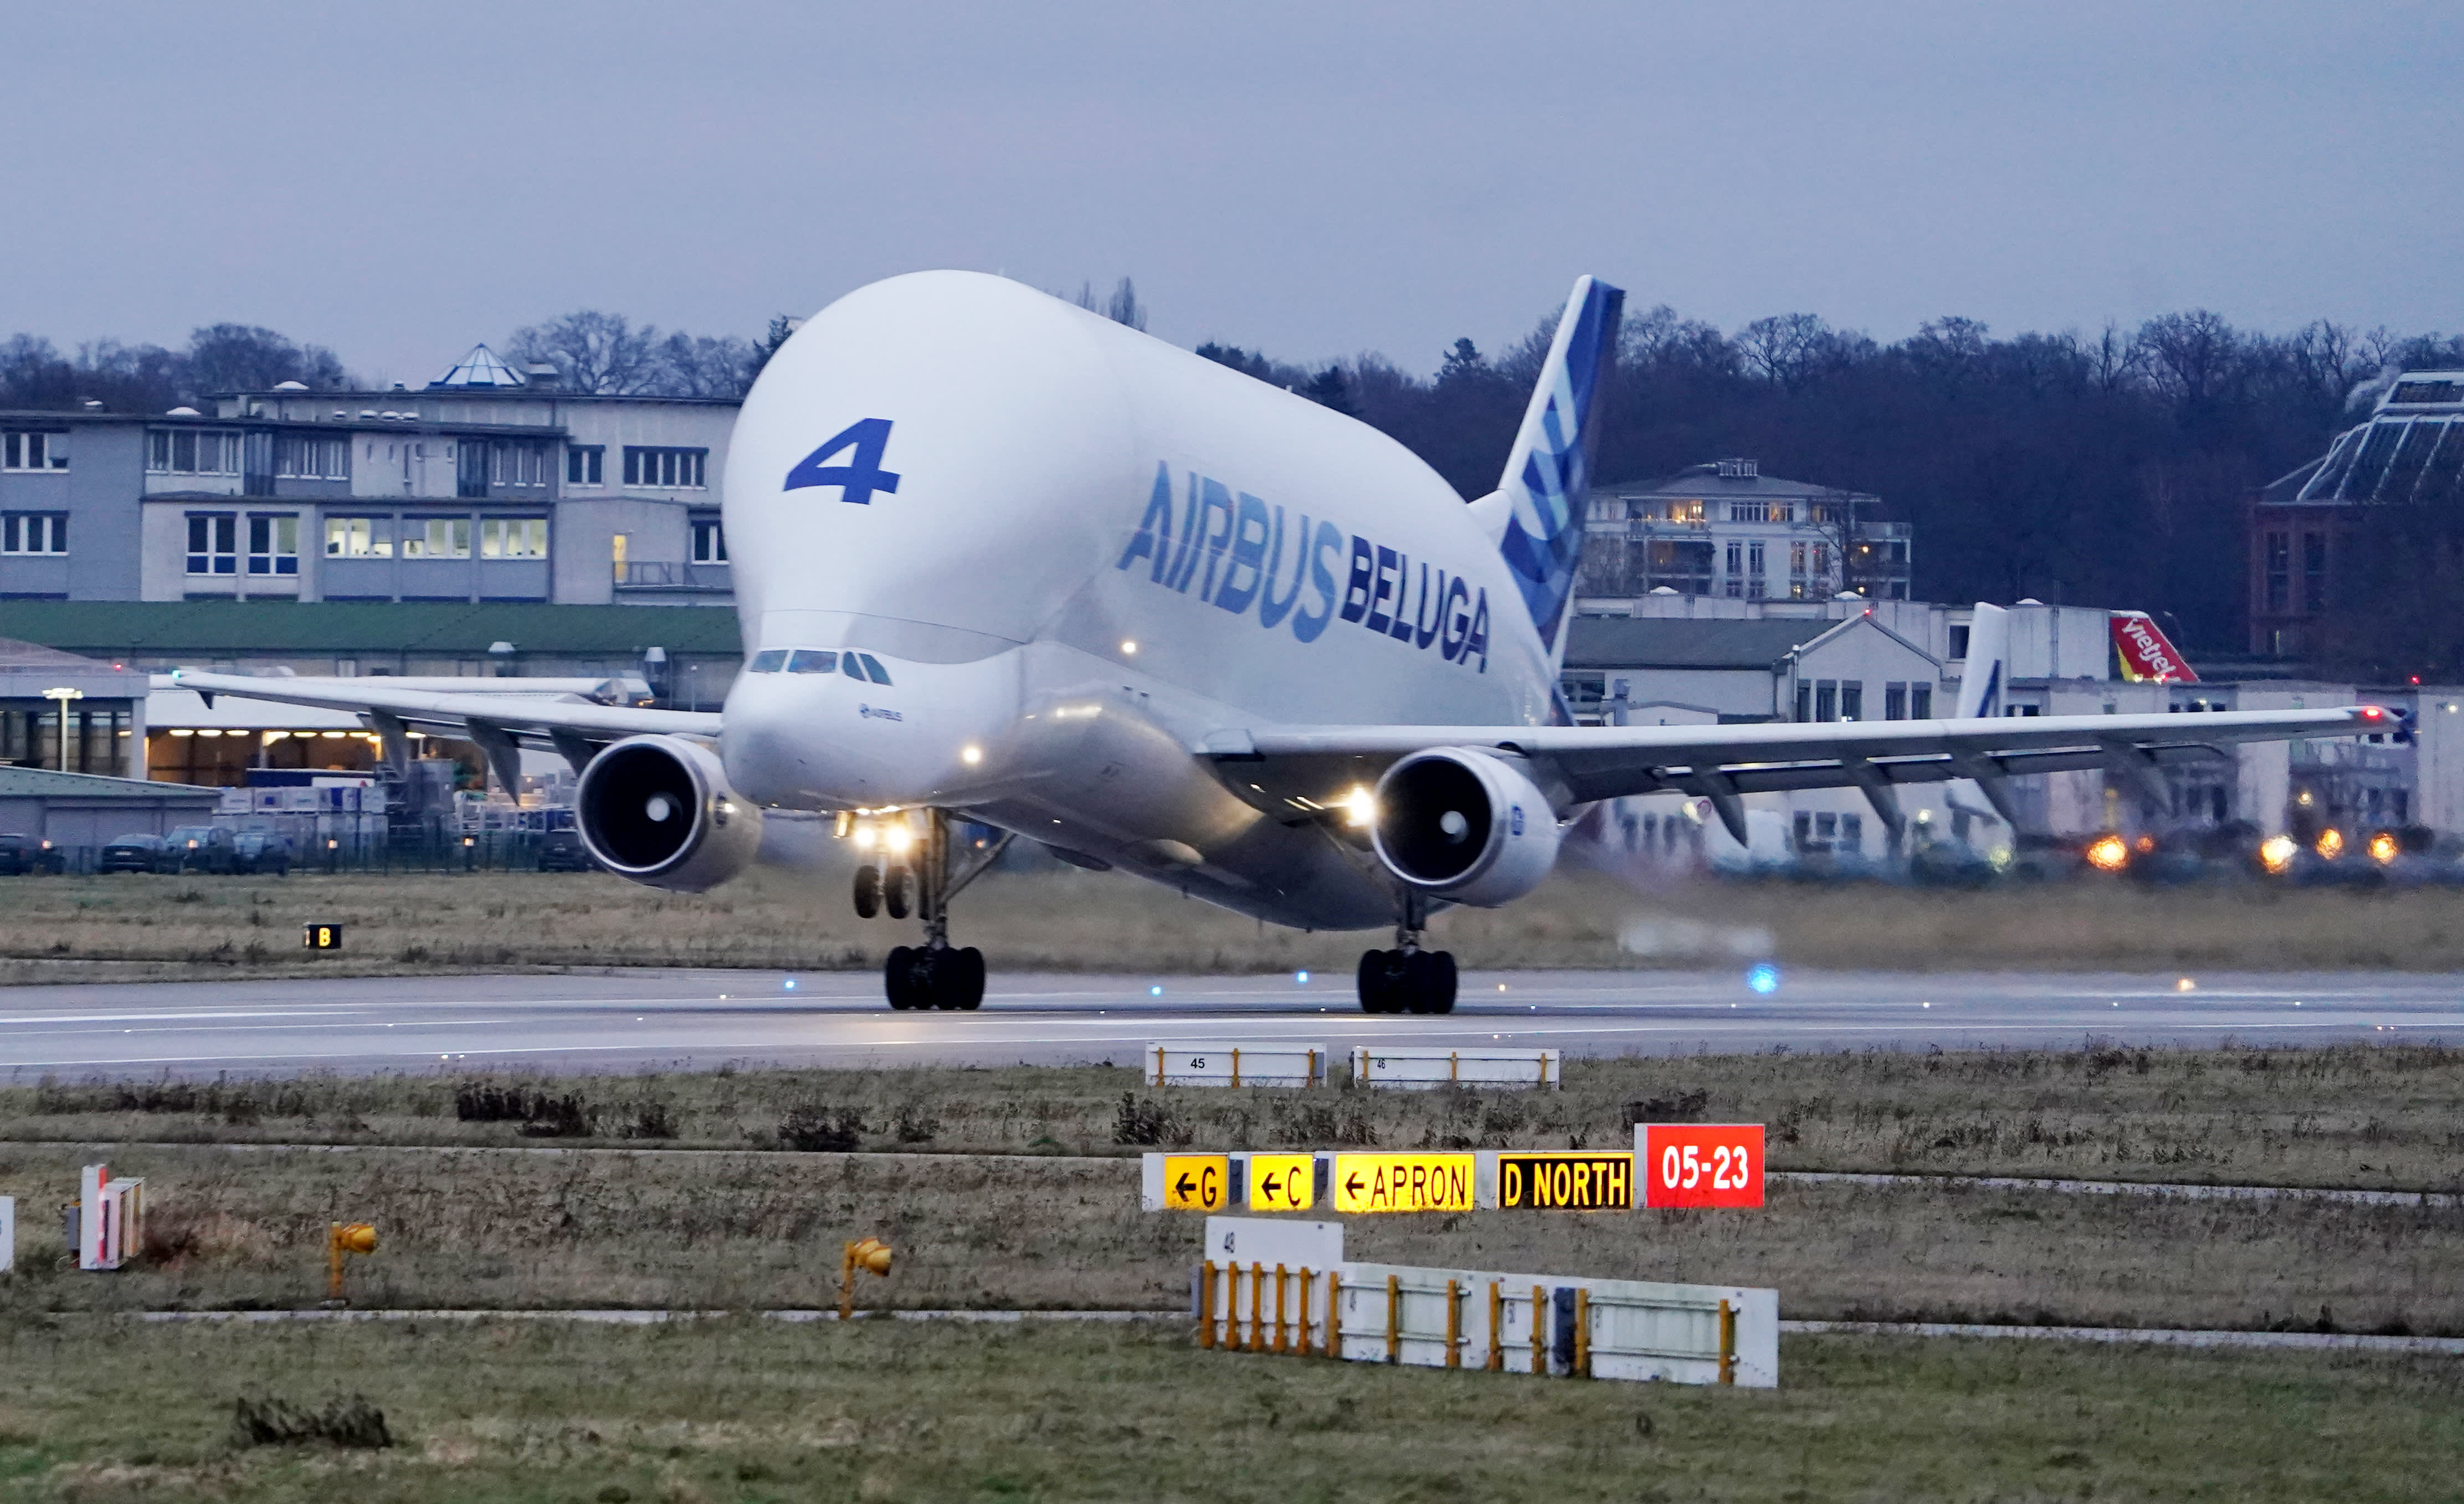 Airbus to rent out its giant Beluga aircraft in bet on air cargo boom